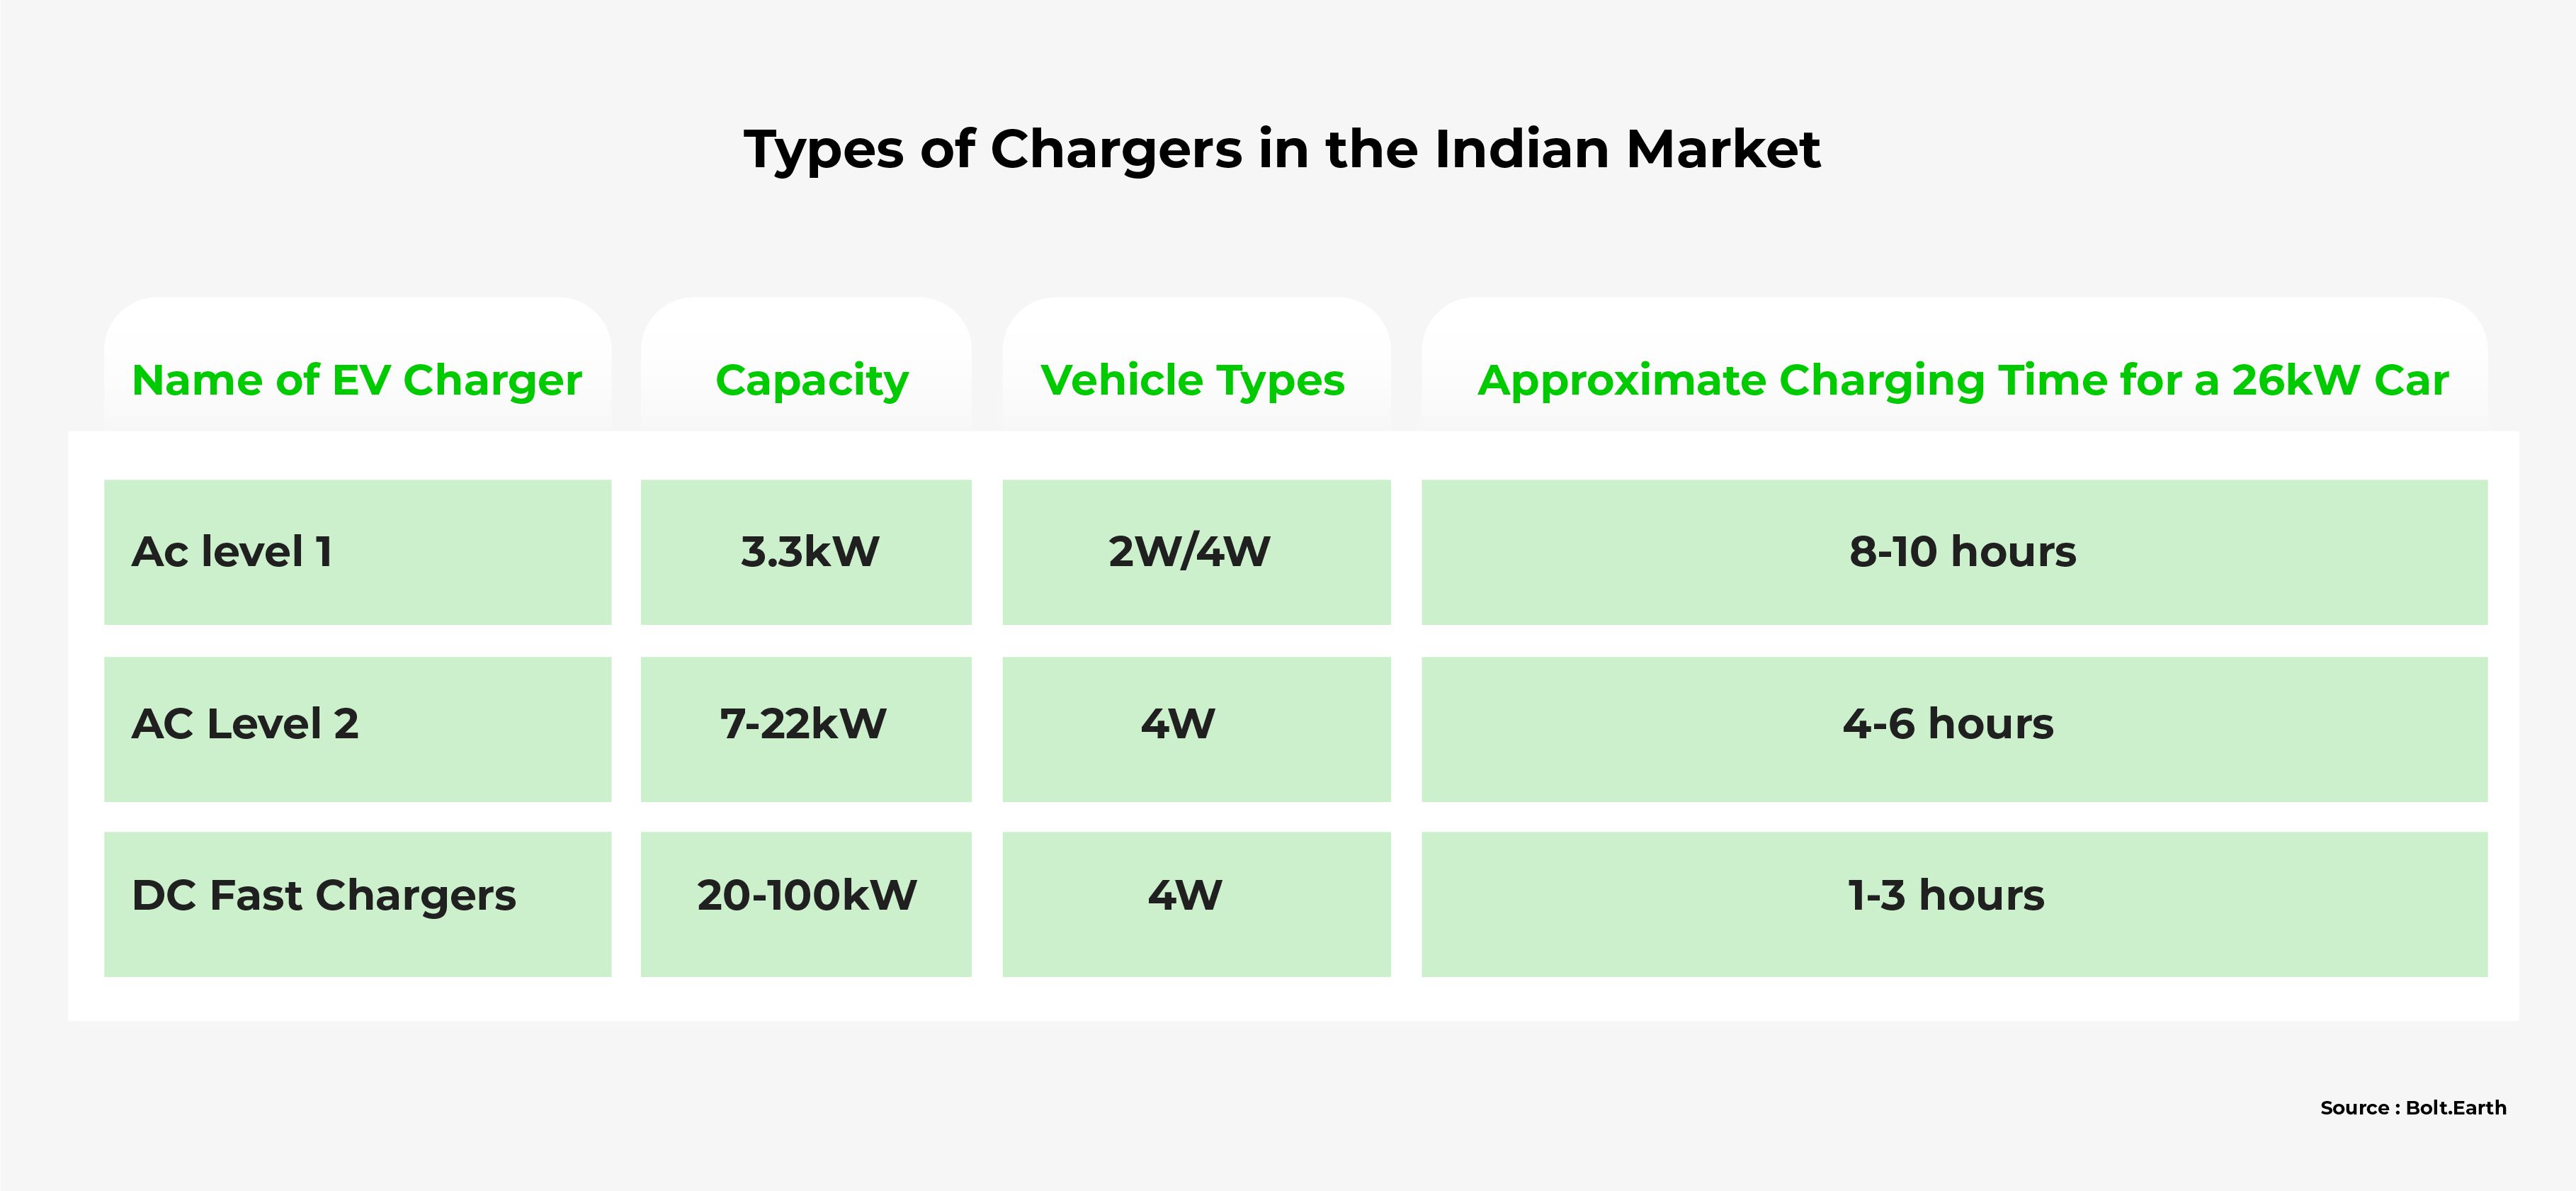 Table displaying 3 types of chargers on the EV market and their corresponding capacity, vehicle types, and approximate charging time for a 26 kW car.